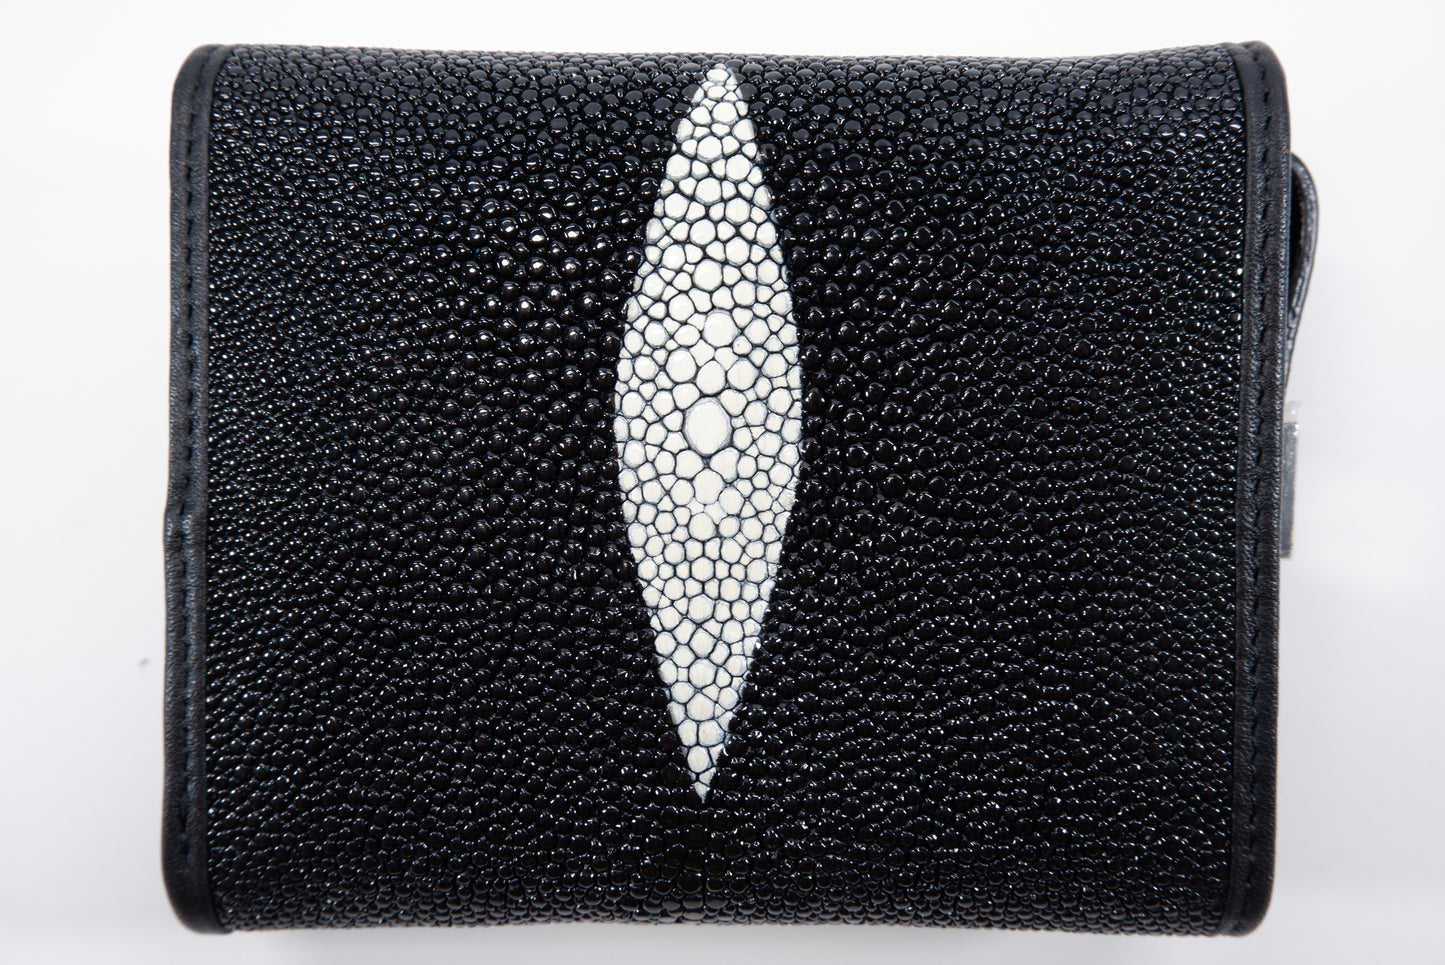 Genuine Stingray Skin Leather Medium Clutch Wallet Zip Coins Purse with Silver Buckle